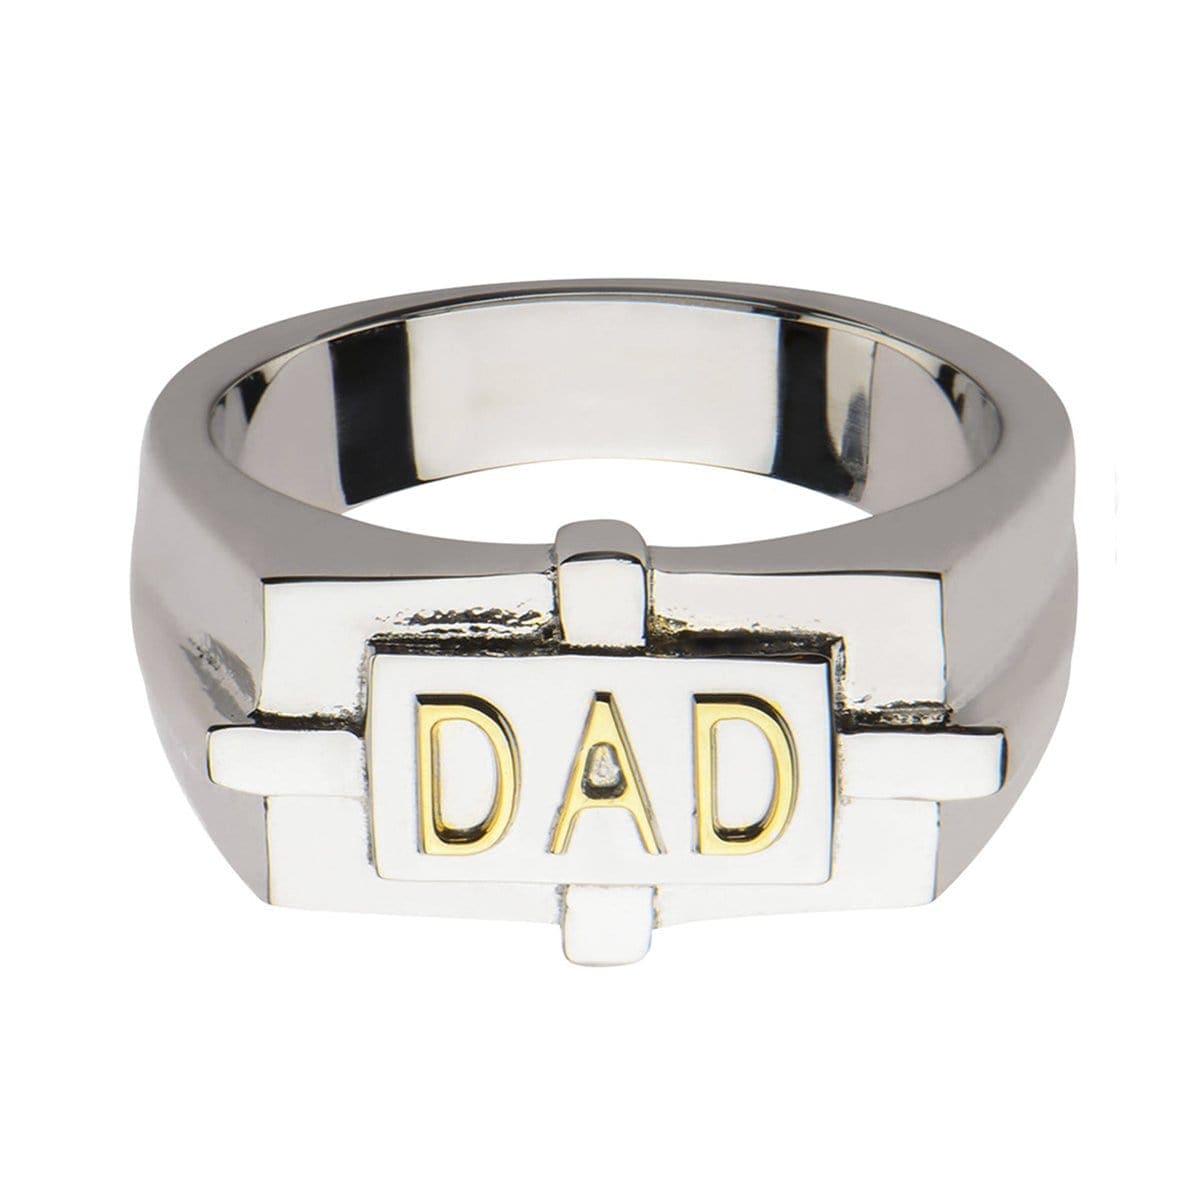 INOX JEWELRY Rings Golden Tone and Silver Tone Stainless Steel DAD Engraved Ring